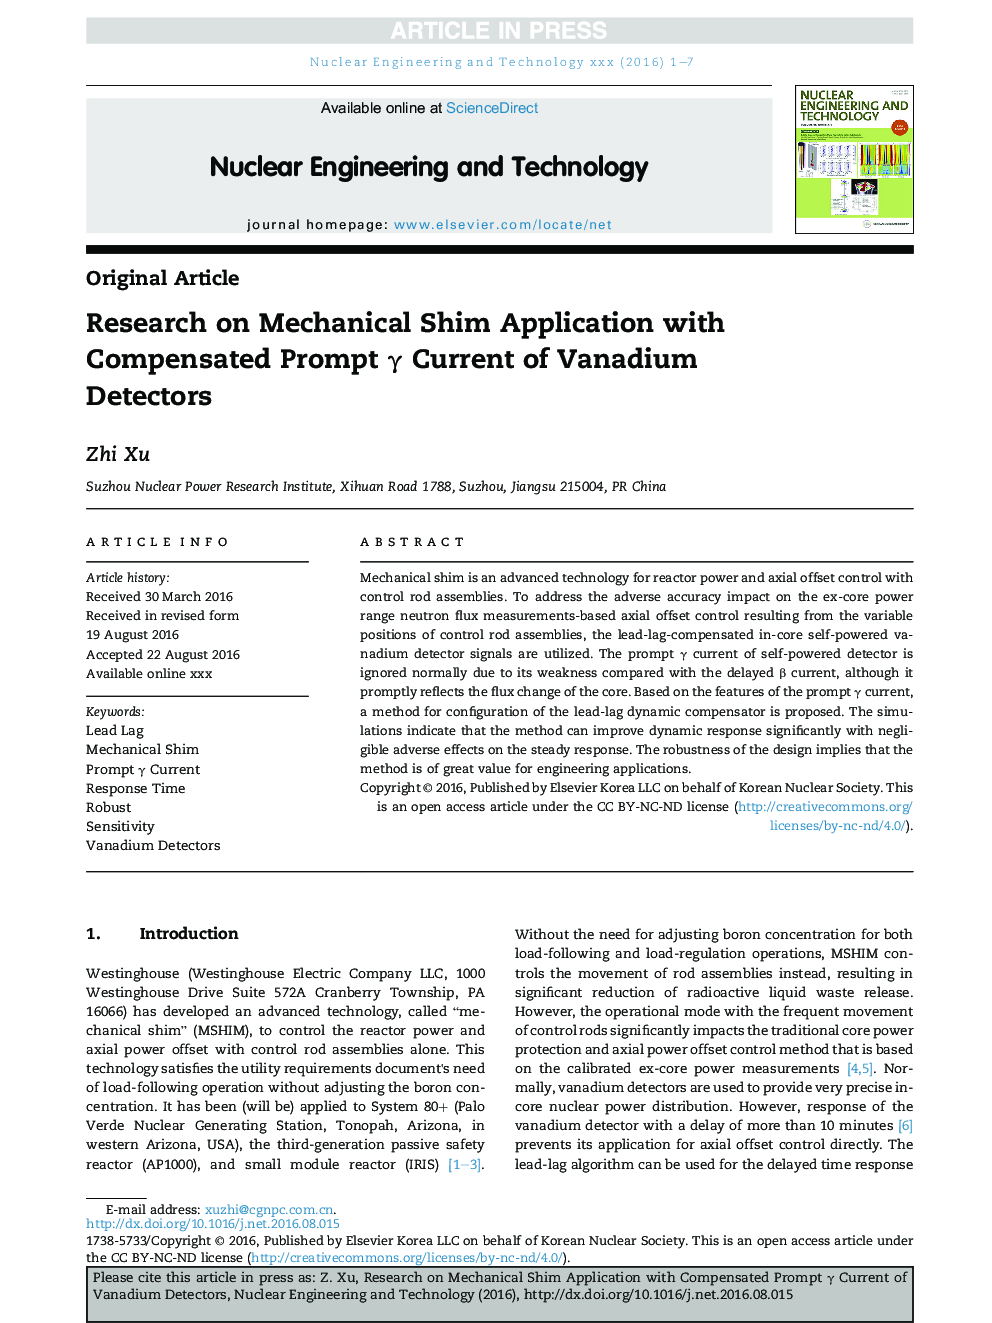 Research on Mechanical Shim Application with Compensated Prompt Î³ Current of Vanadium Detectors